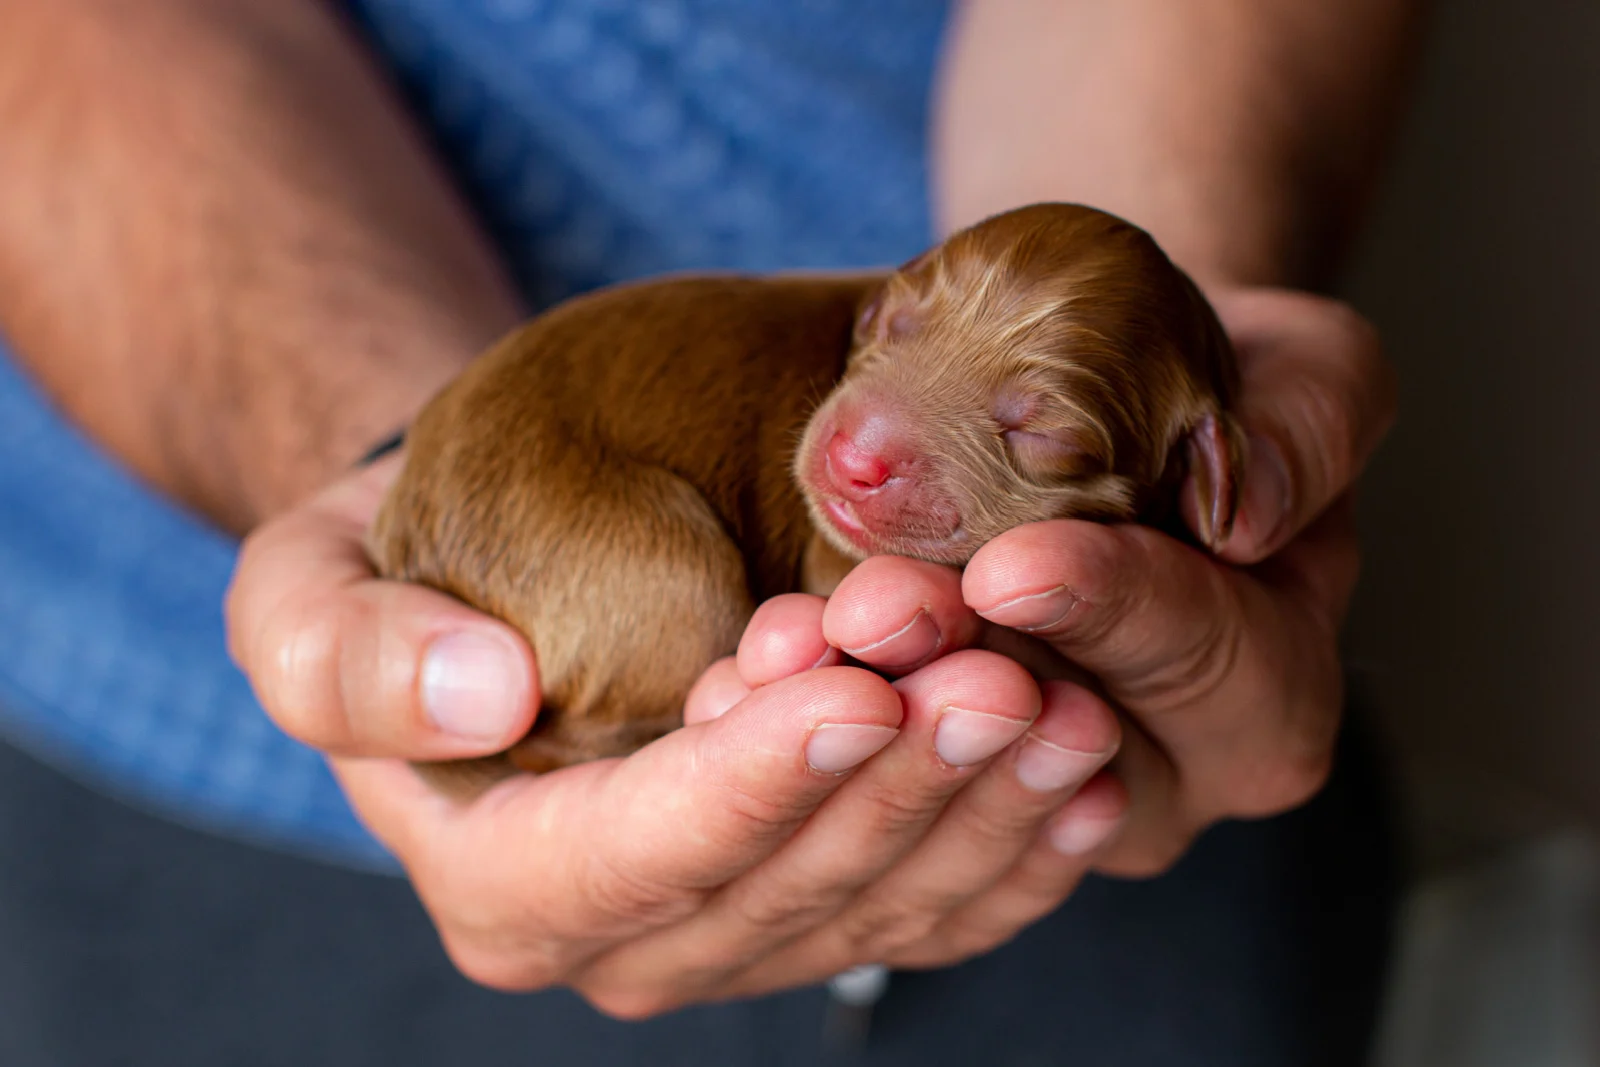 Newborn puppy sleeping peacefully in the palms of the hands